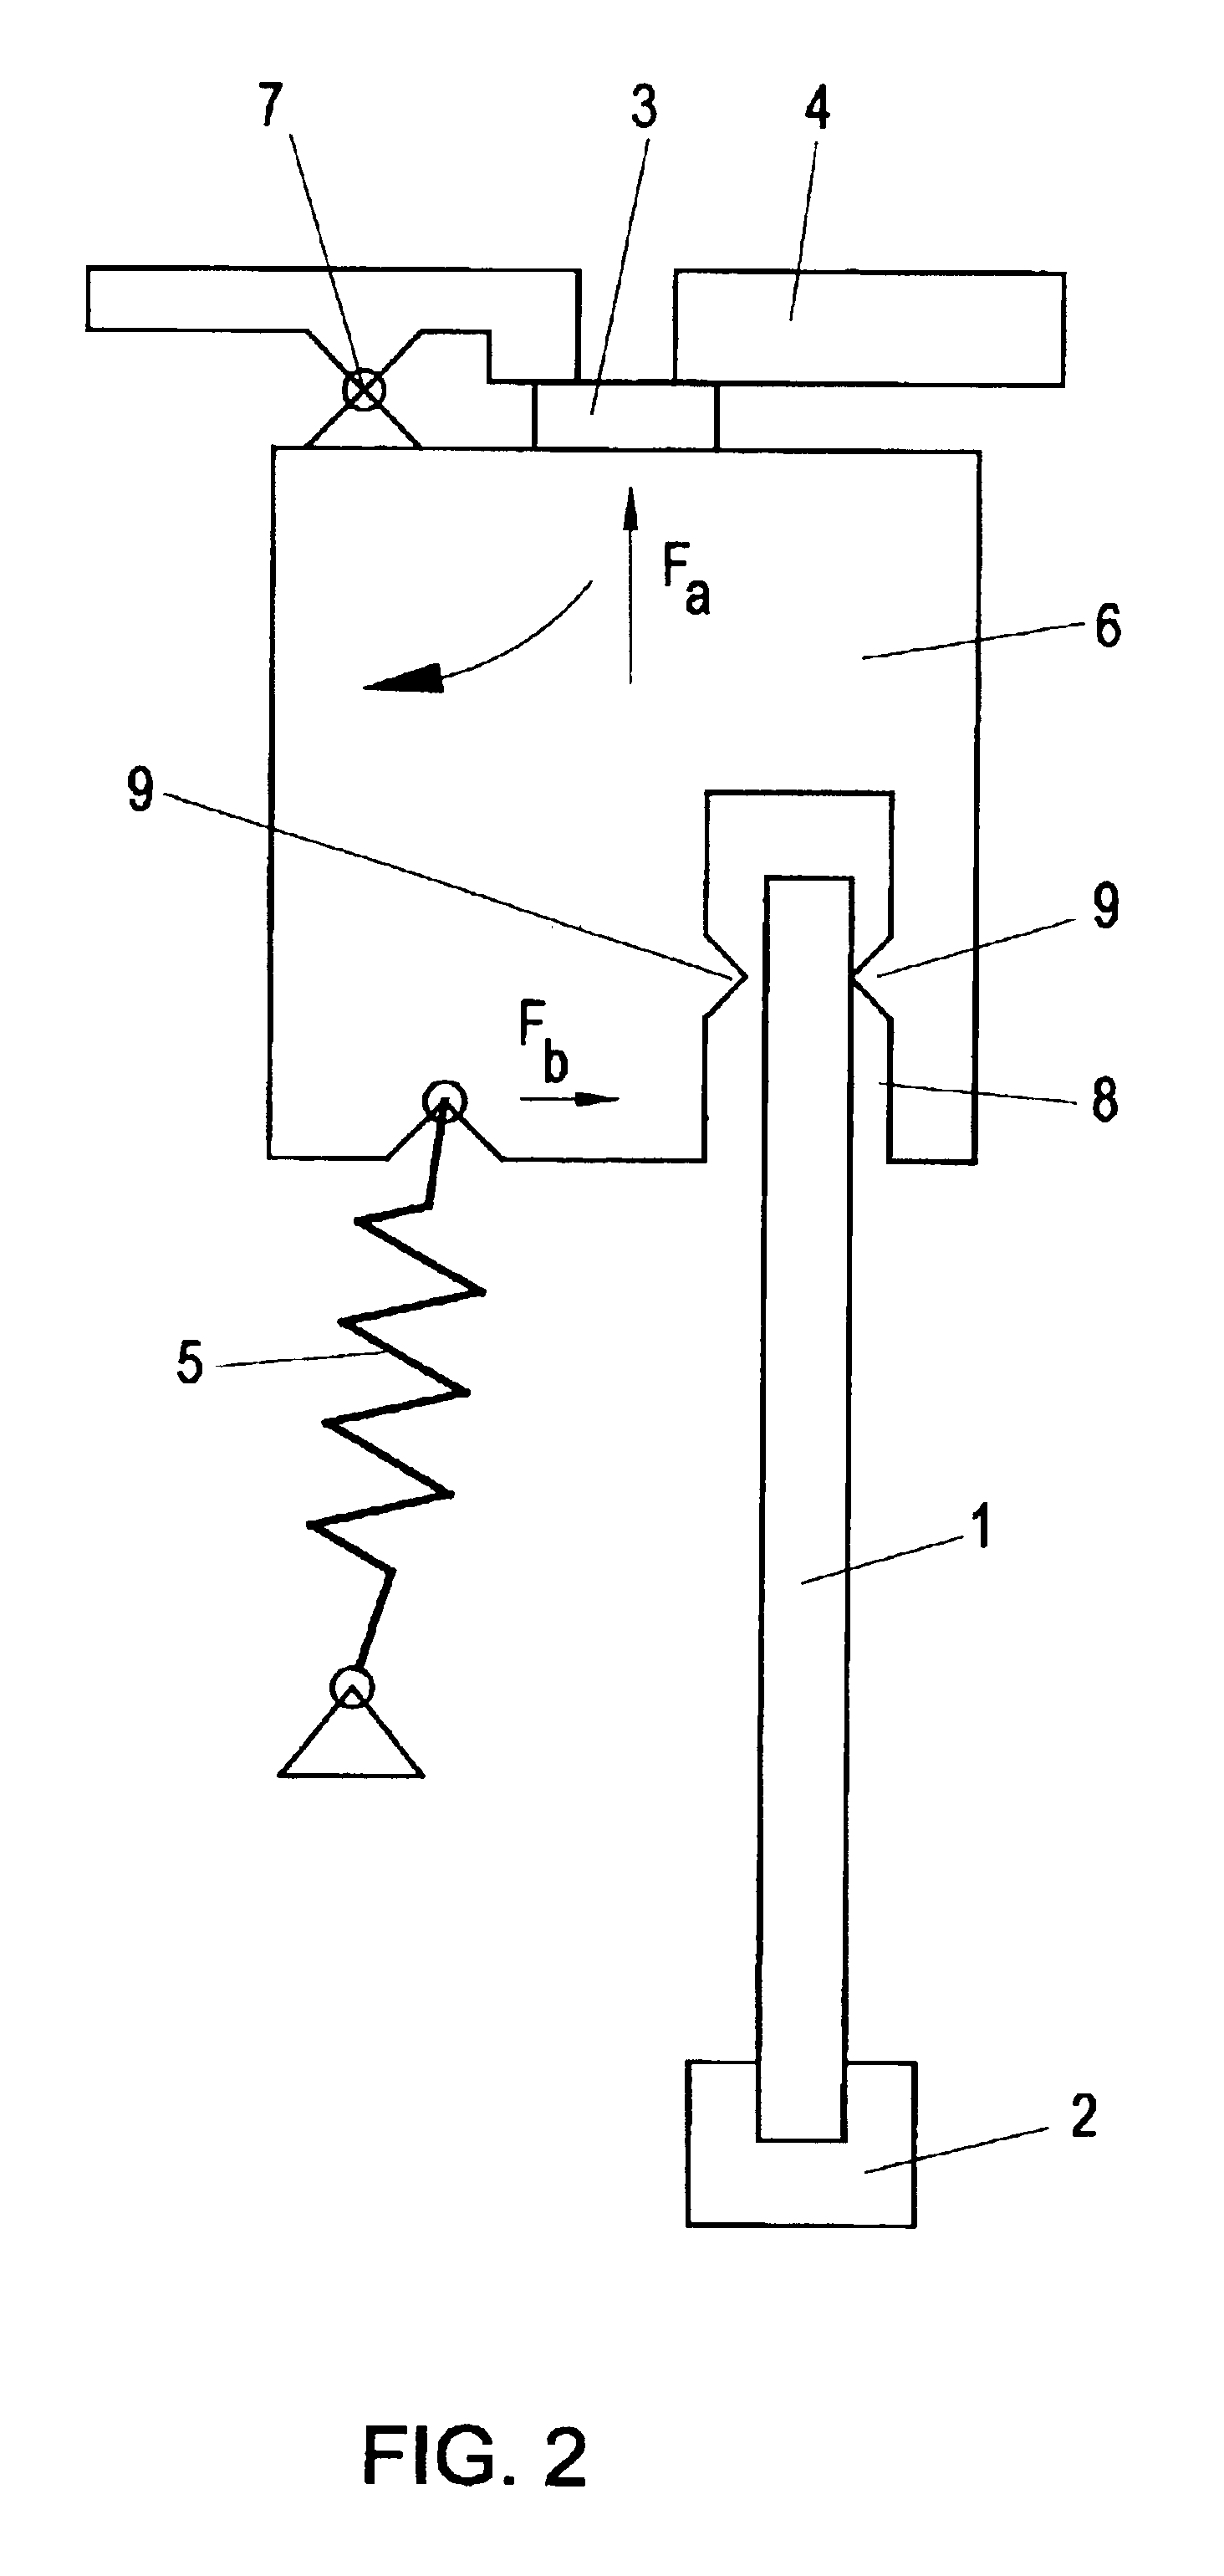 Valve with unilaterally constrained piezoelectric bending element as actuating device